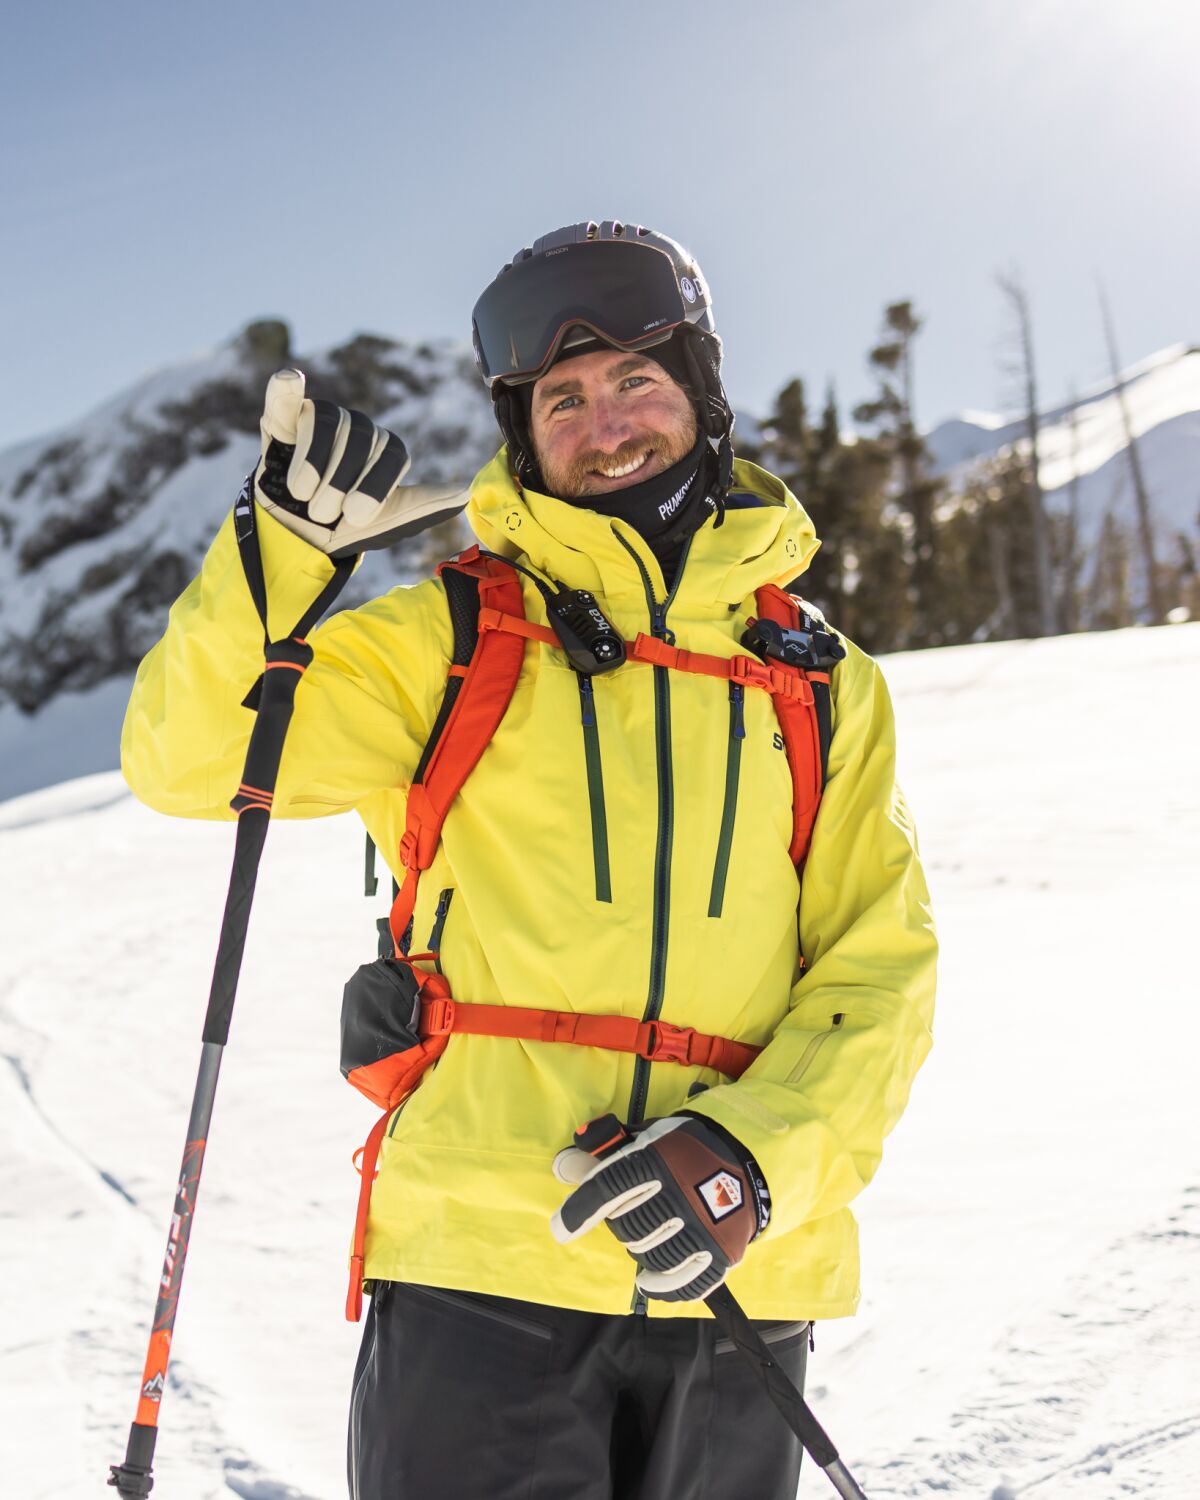 Vertical outdoor picture of smiling man with facial hair in ski helmet, light yellow jacket and ski poles.